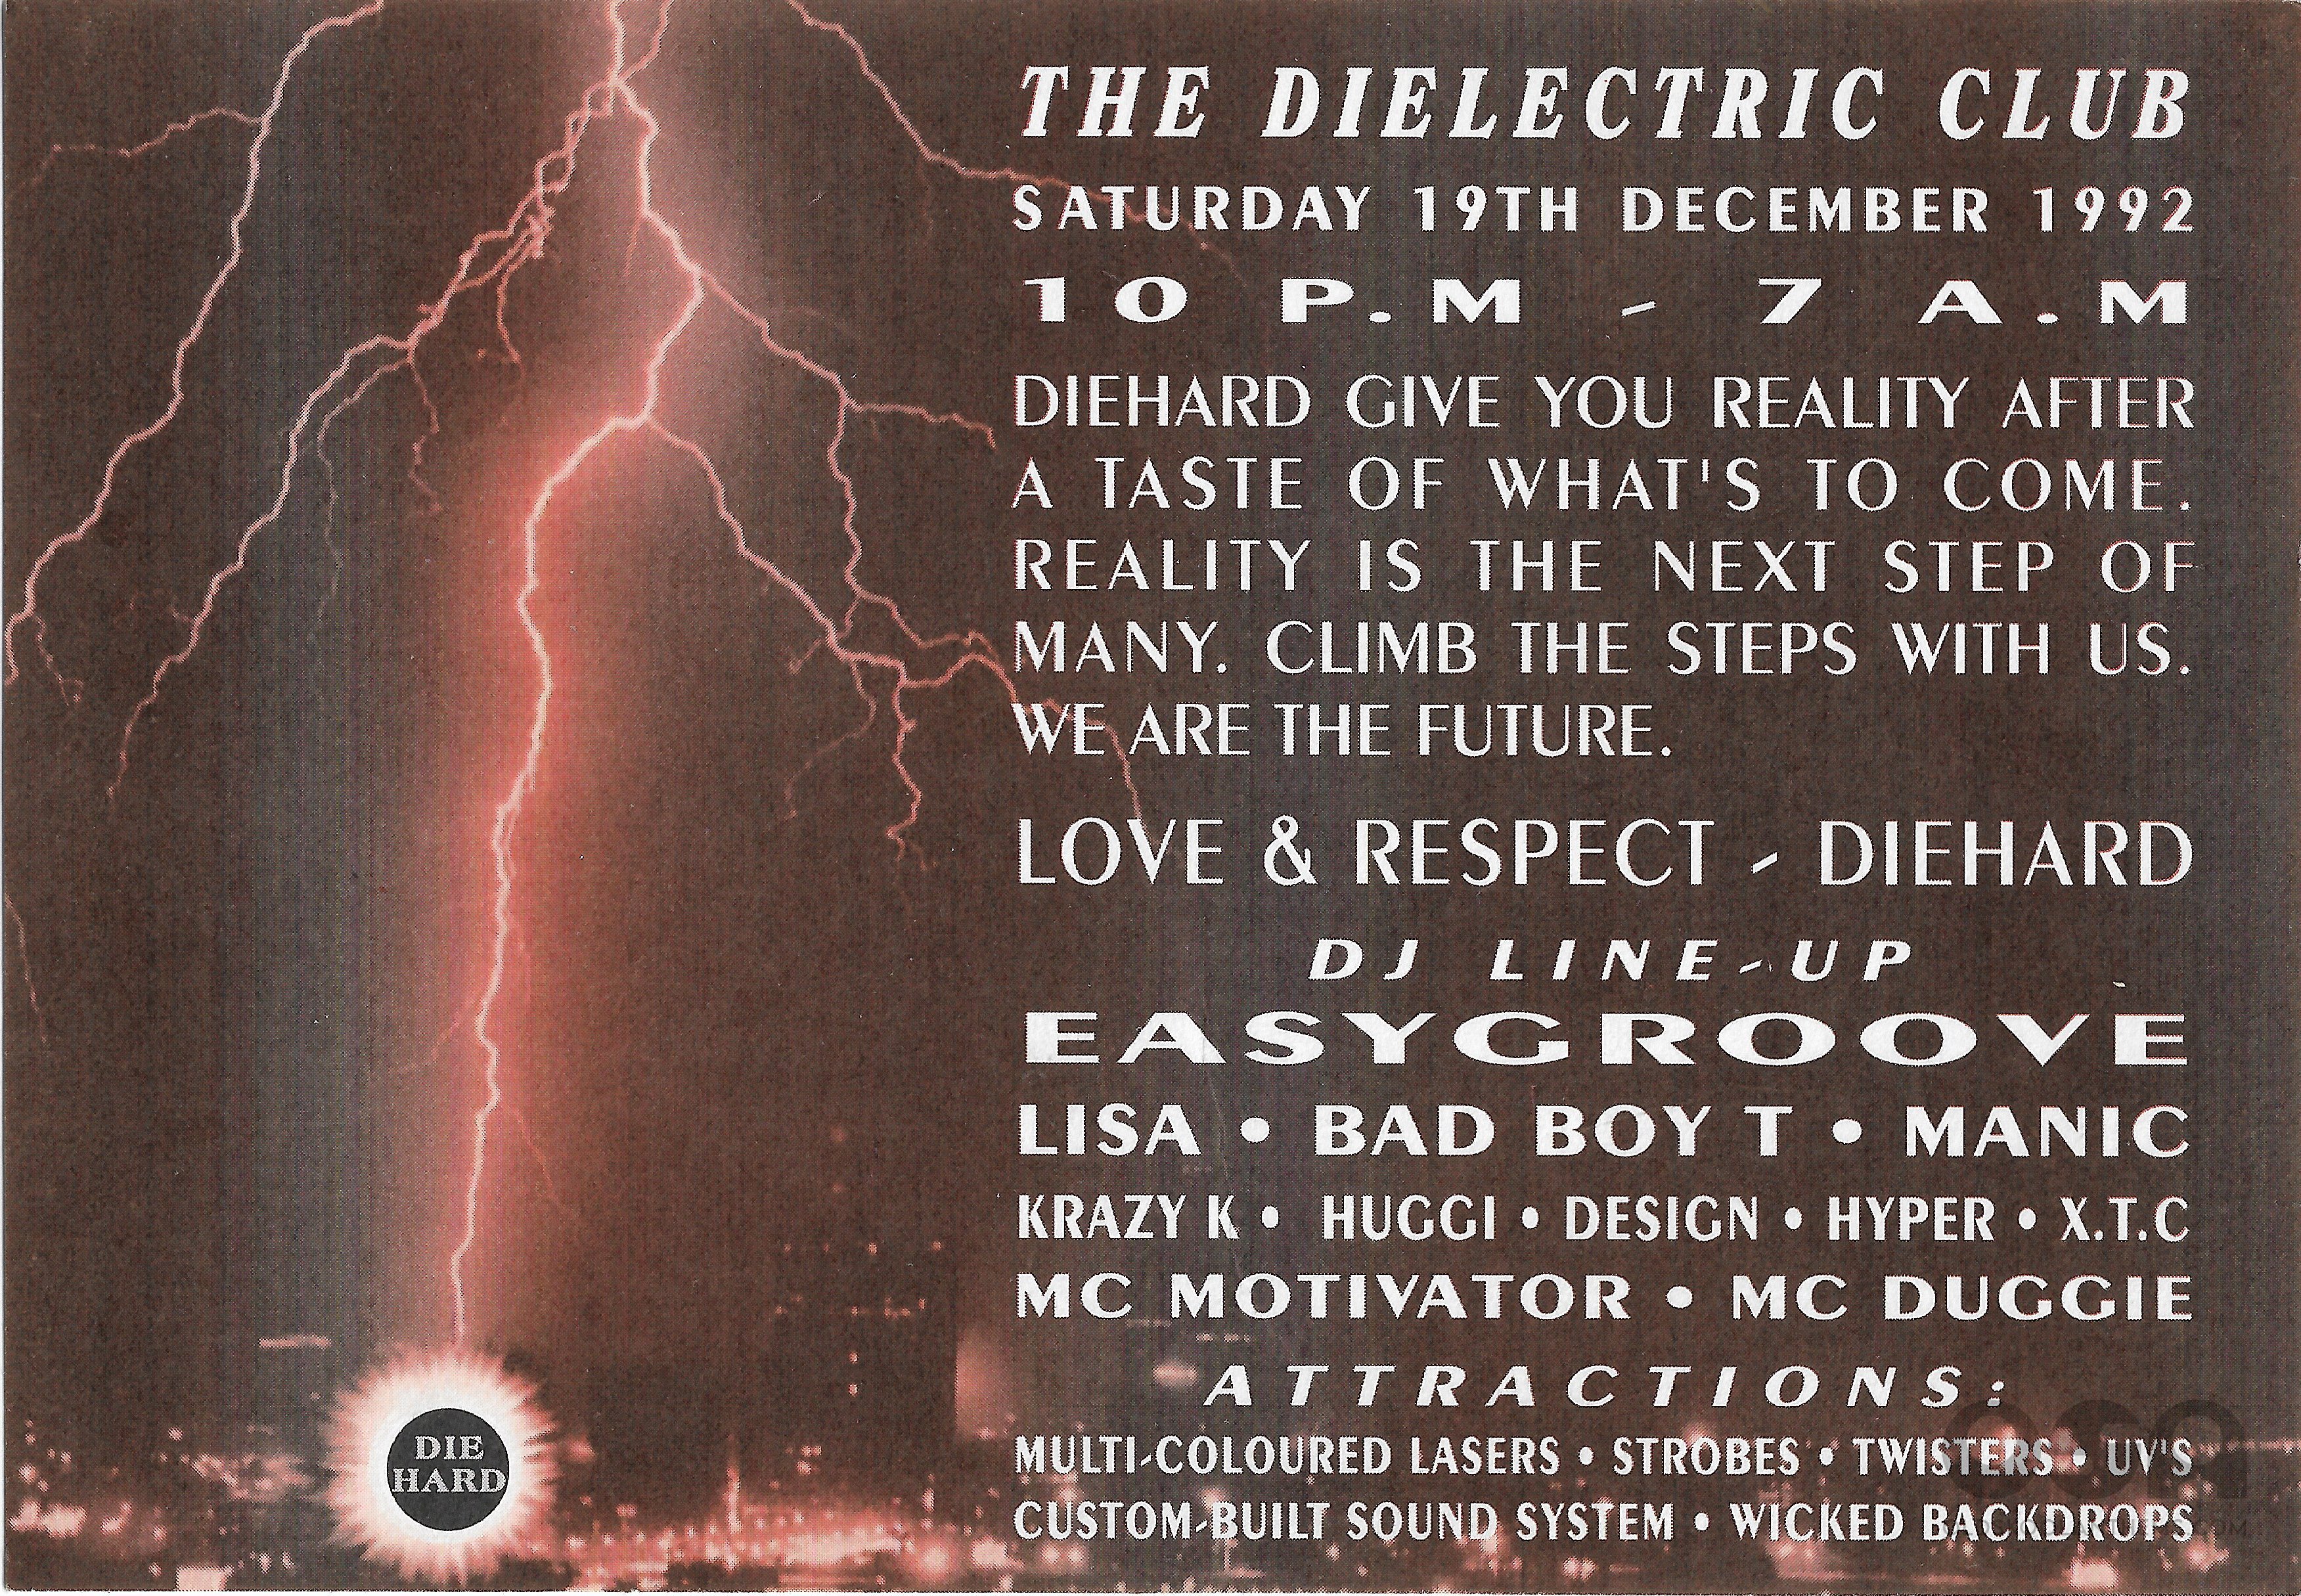 Die Hard @ The Dilectric Club - 19th December 1992 - Single Sided Flyer.jpg